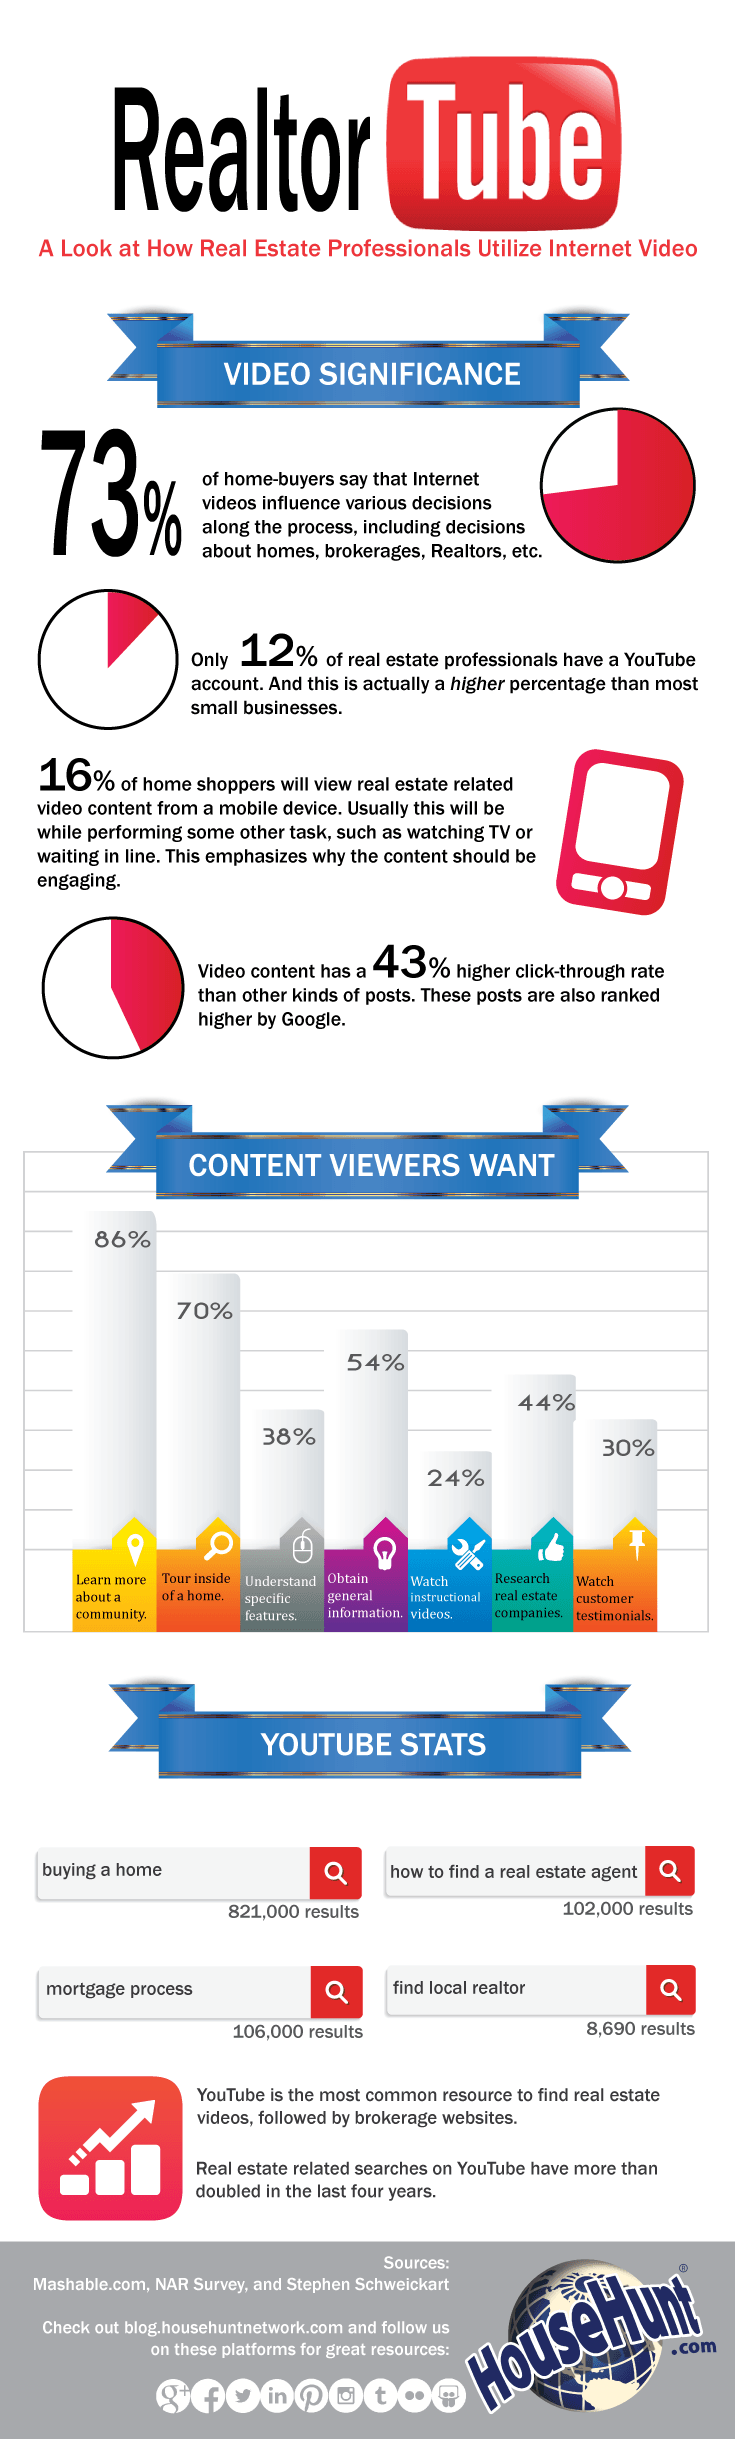 Real Estate Video Marketing infographic